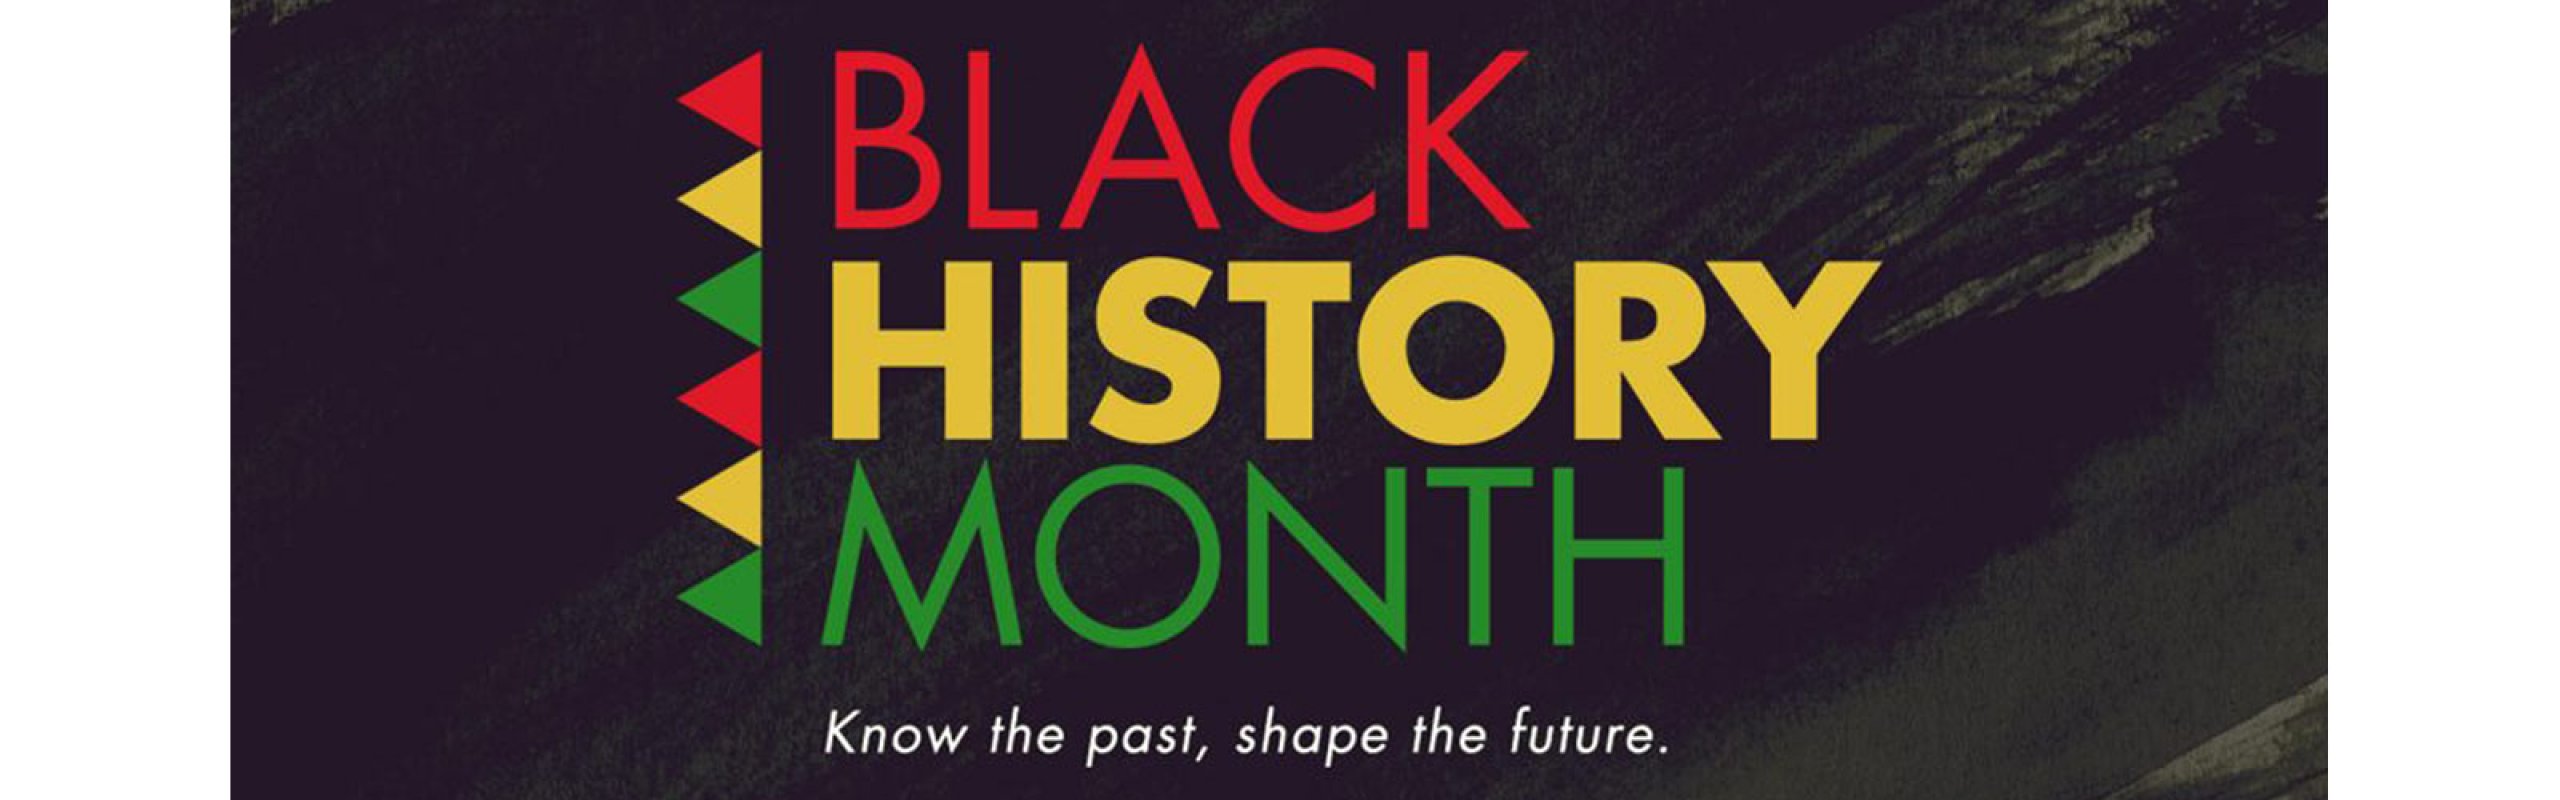 A lecture for Black History Month Florence